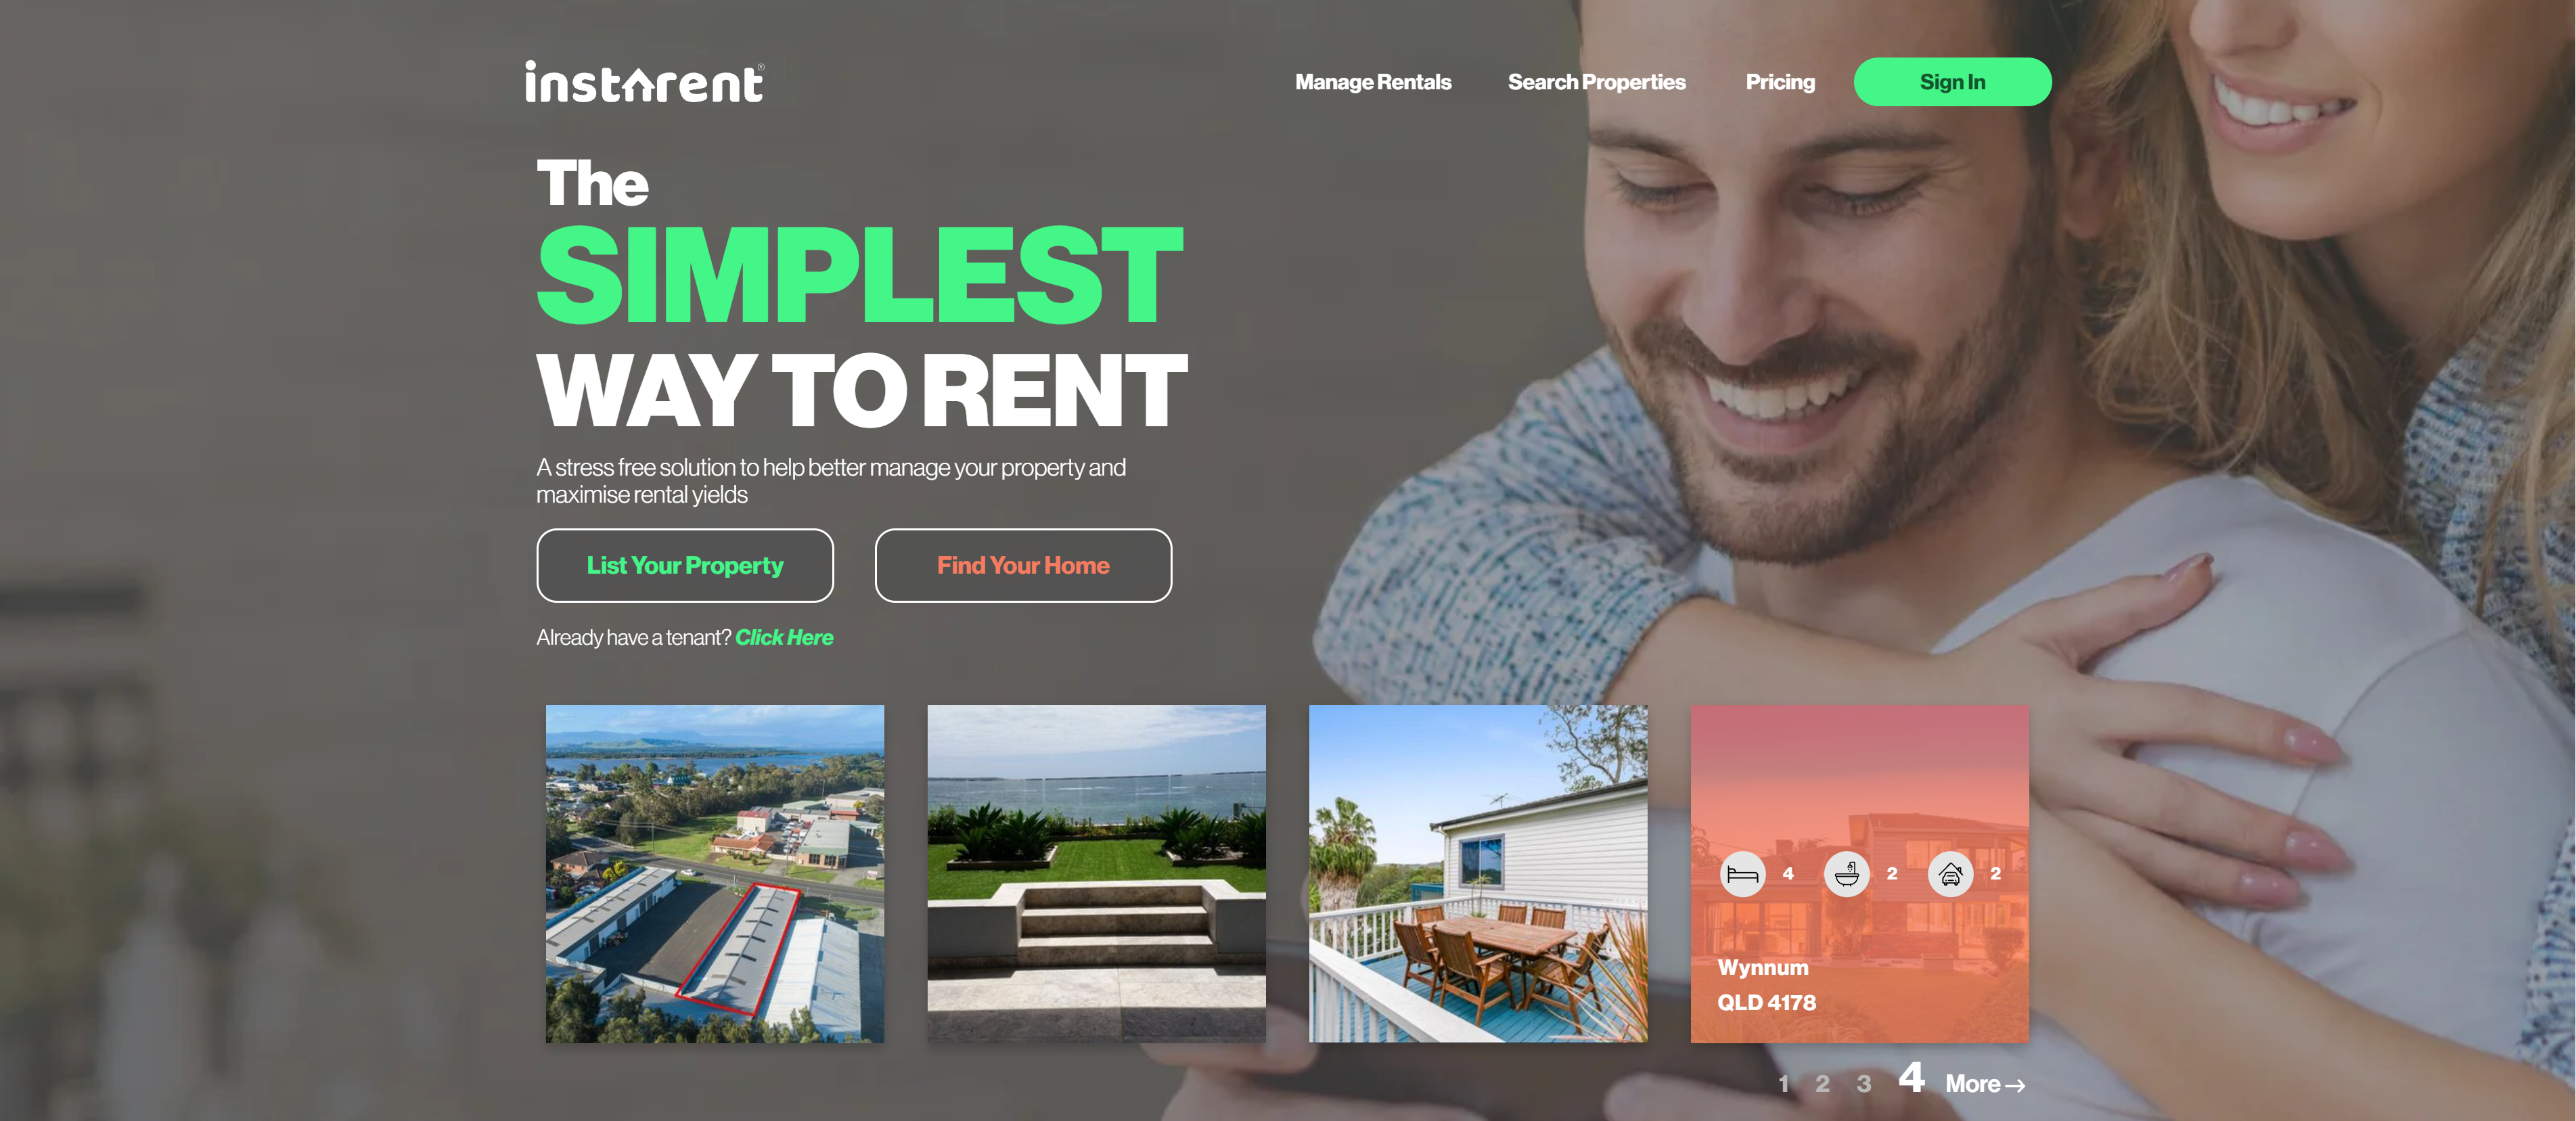 instarent home page